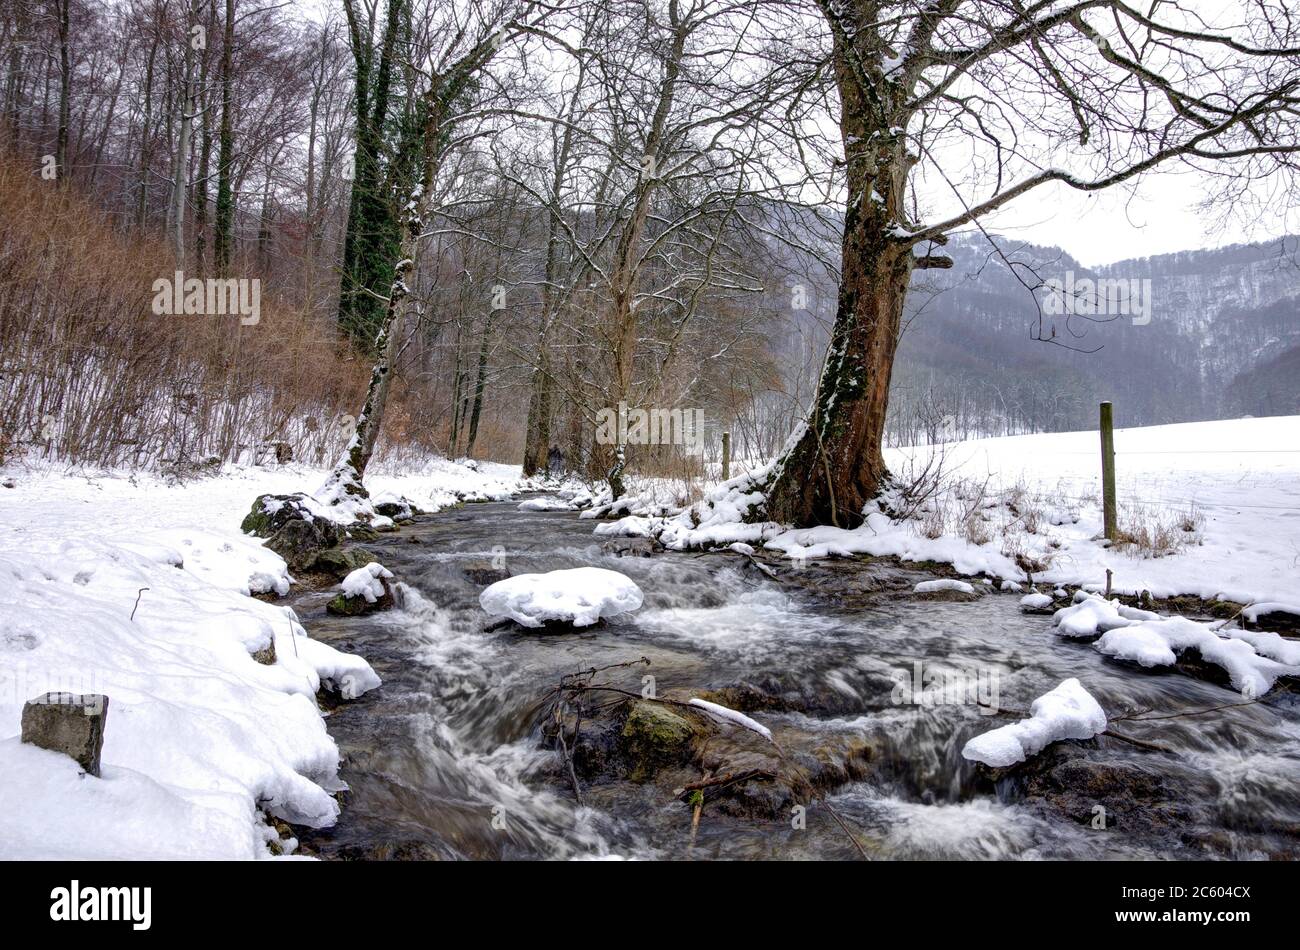 Small mountain stream in winter with ice sheets, Bruehlbach, Bad Urach, Baden-Wurttemberg, Germany. Stock Photo